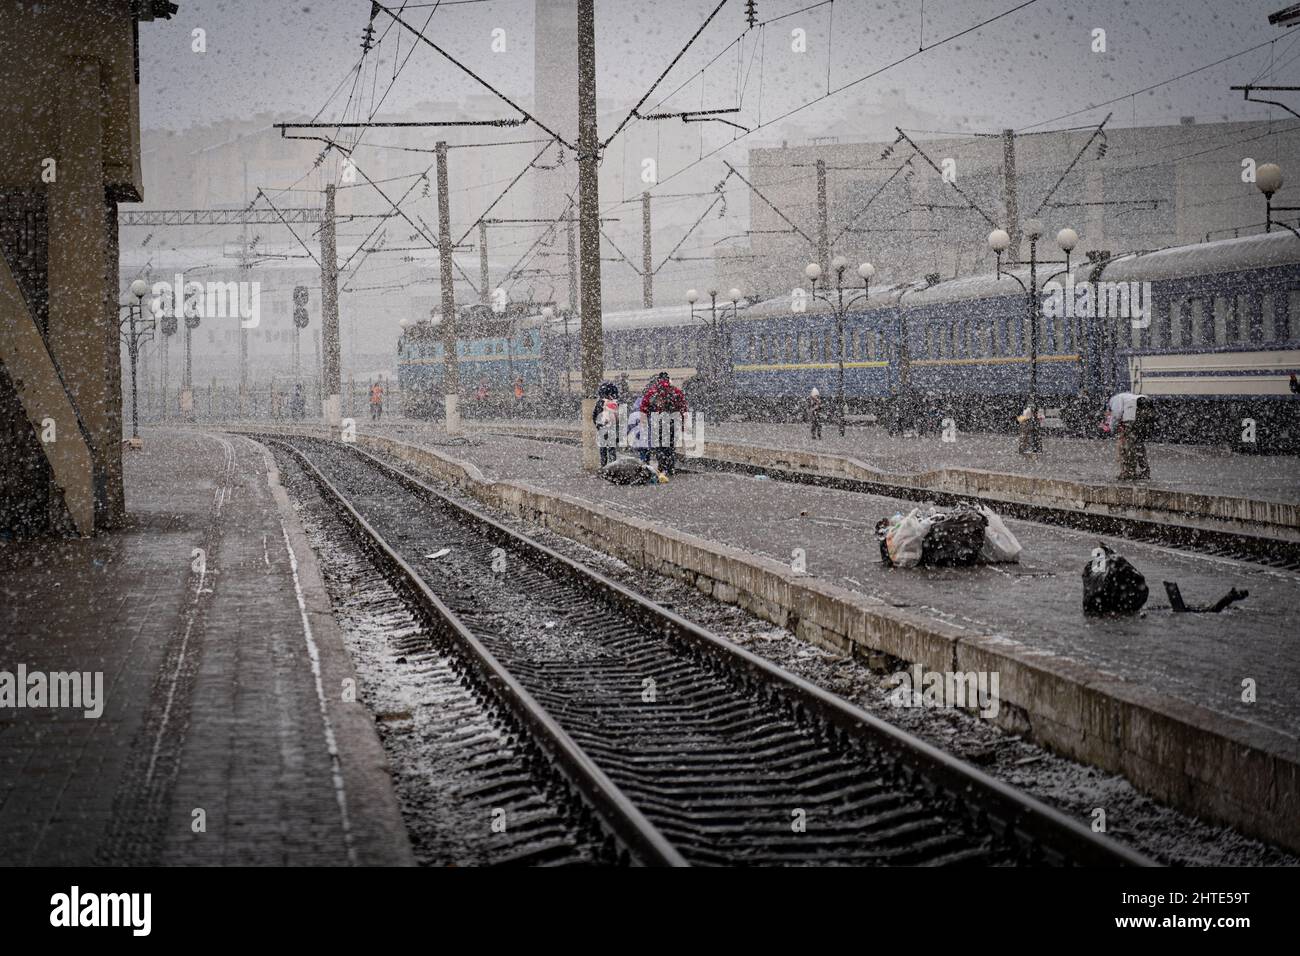 27th February 2022. Lviv Train Station, Ukraine. As snow fell on Sunday, some had to turn around and walk back to the nearest main city to find other ways out, as desperation grows at Ukraine border as more than half a million refugees flee war - Copyright: Bel Trew/The Credit: Independent/Alamy Live News Stock Photo